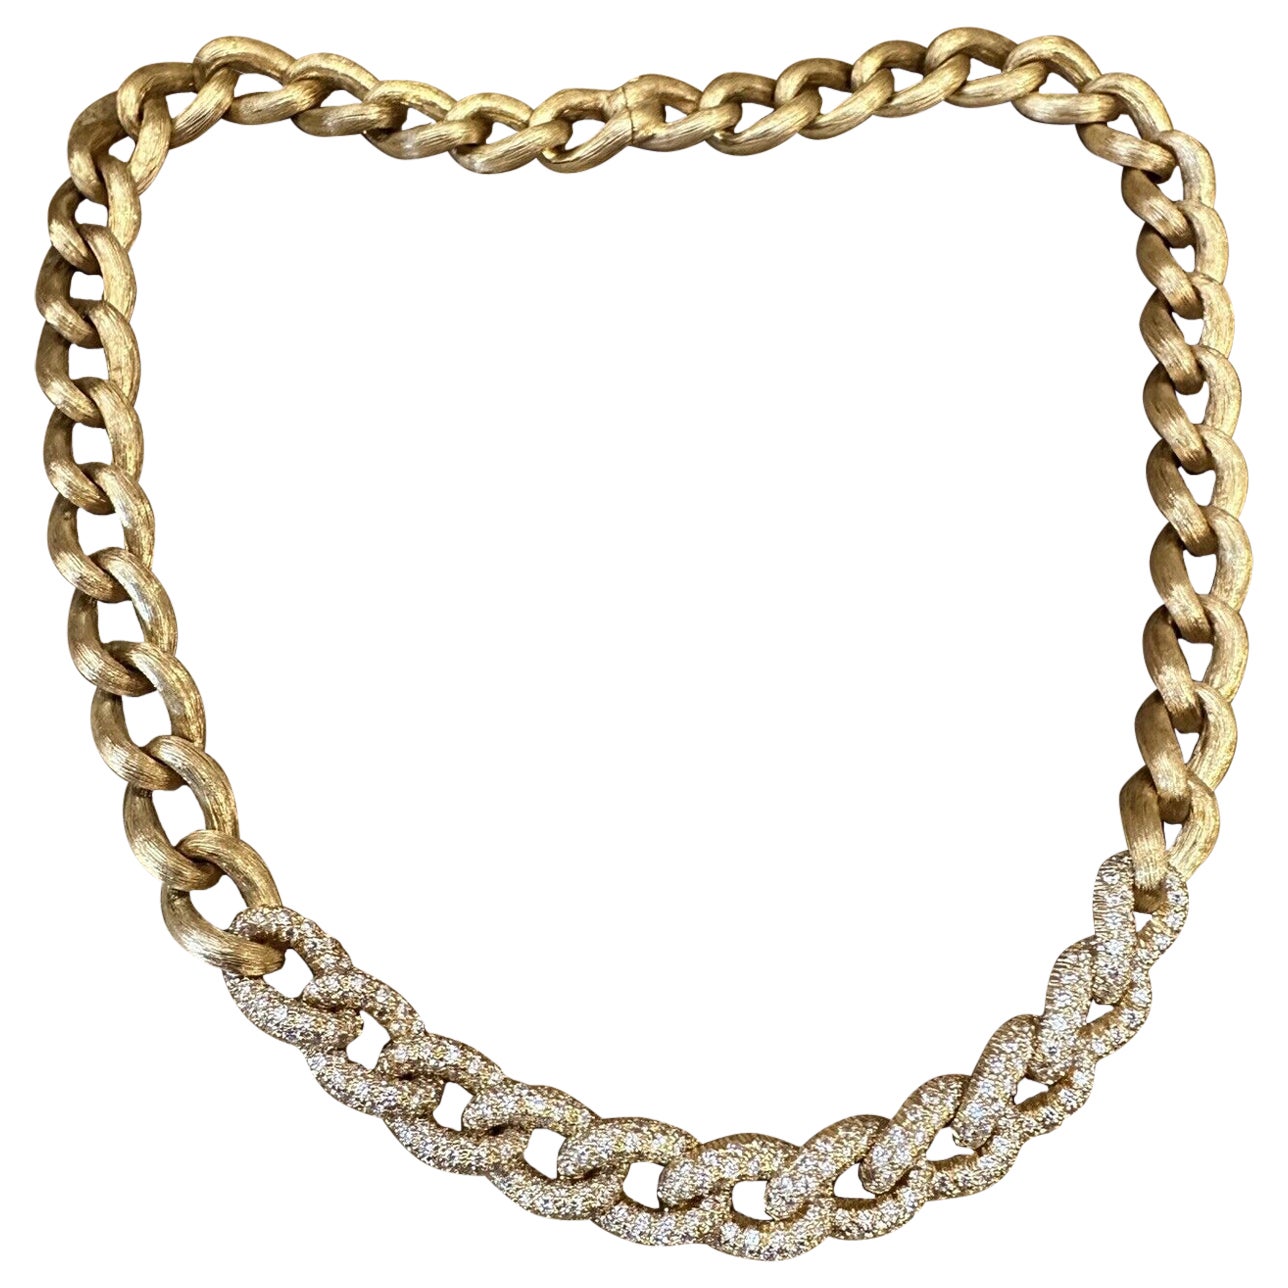 Henry Dunay Curb Diamond Sabi Link Necklace in 18k Yellow Gold